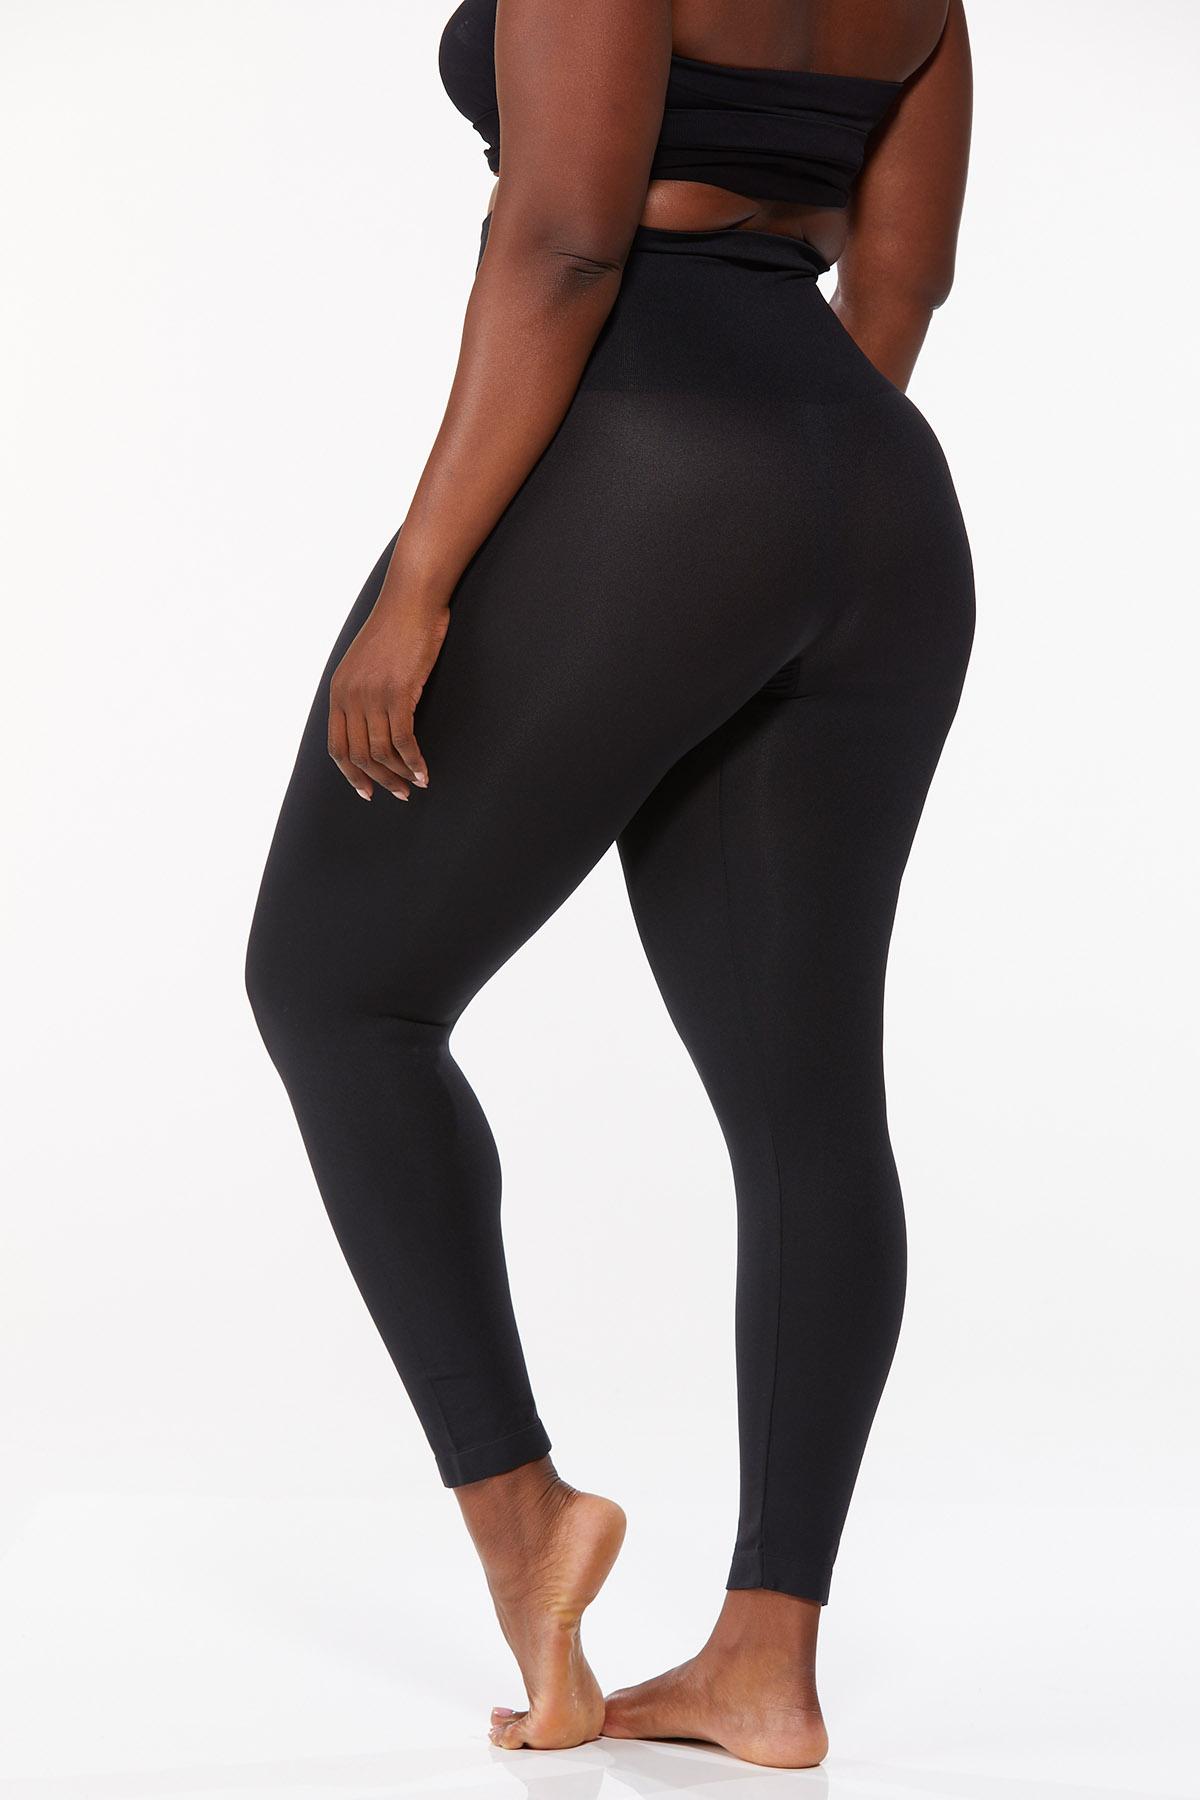 Cato Fashions | Cato Plus Size High Waist Shaping Shorts